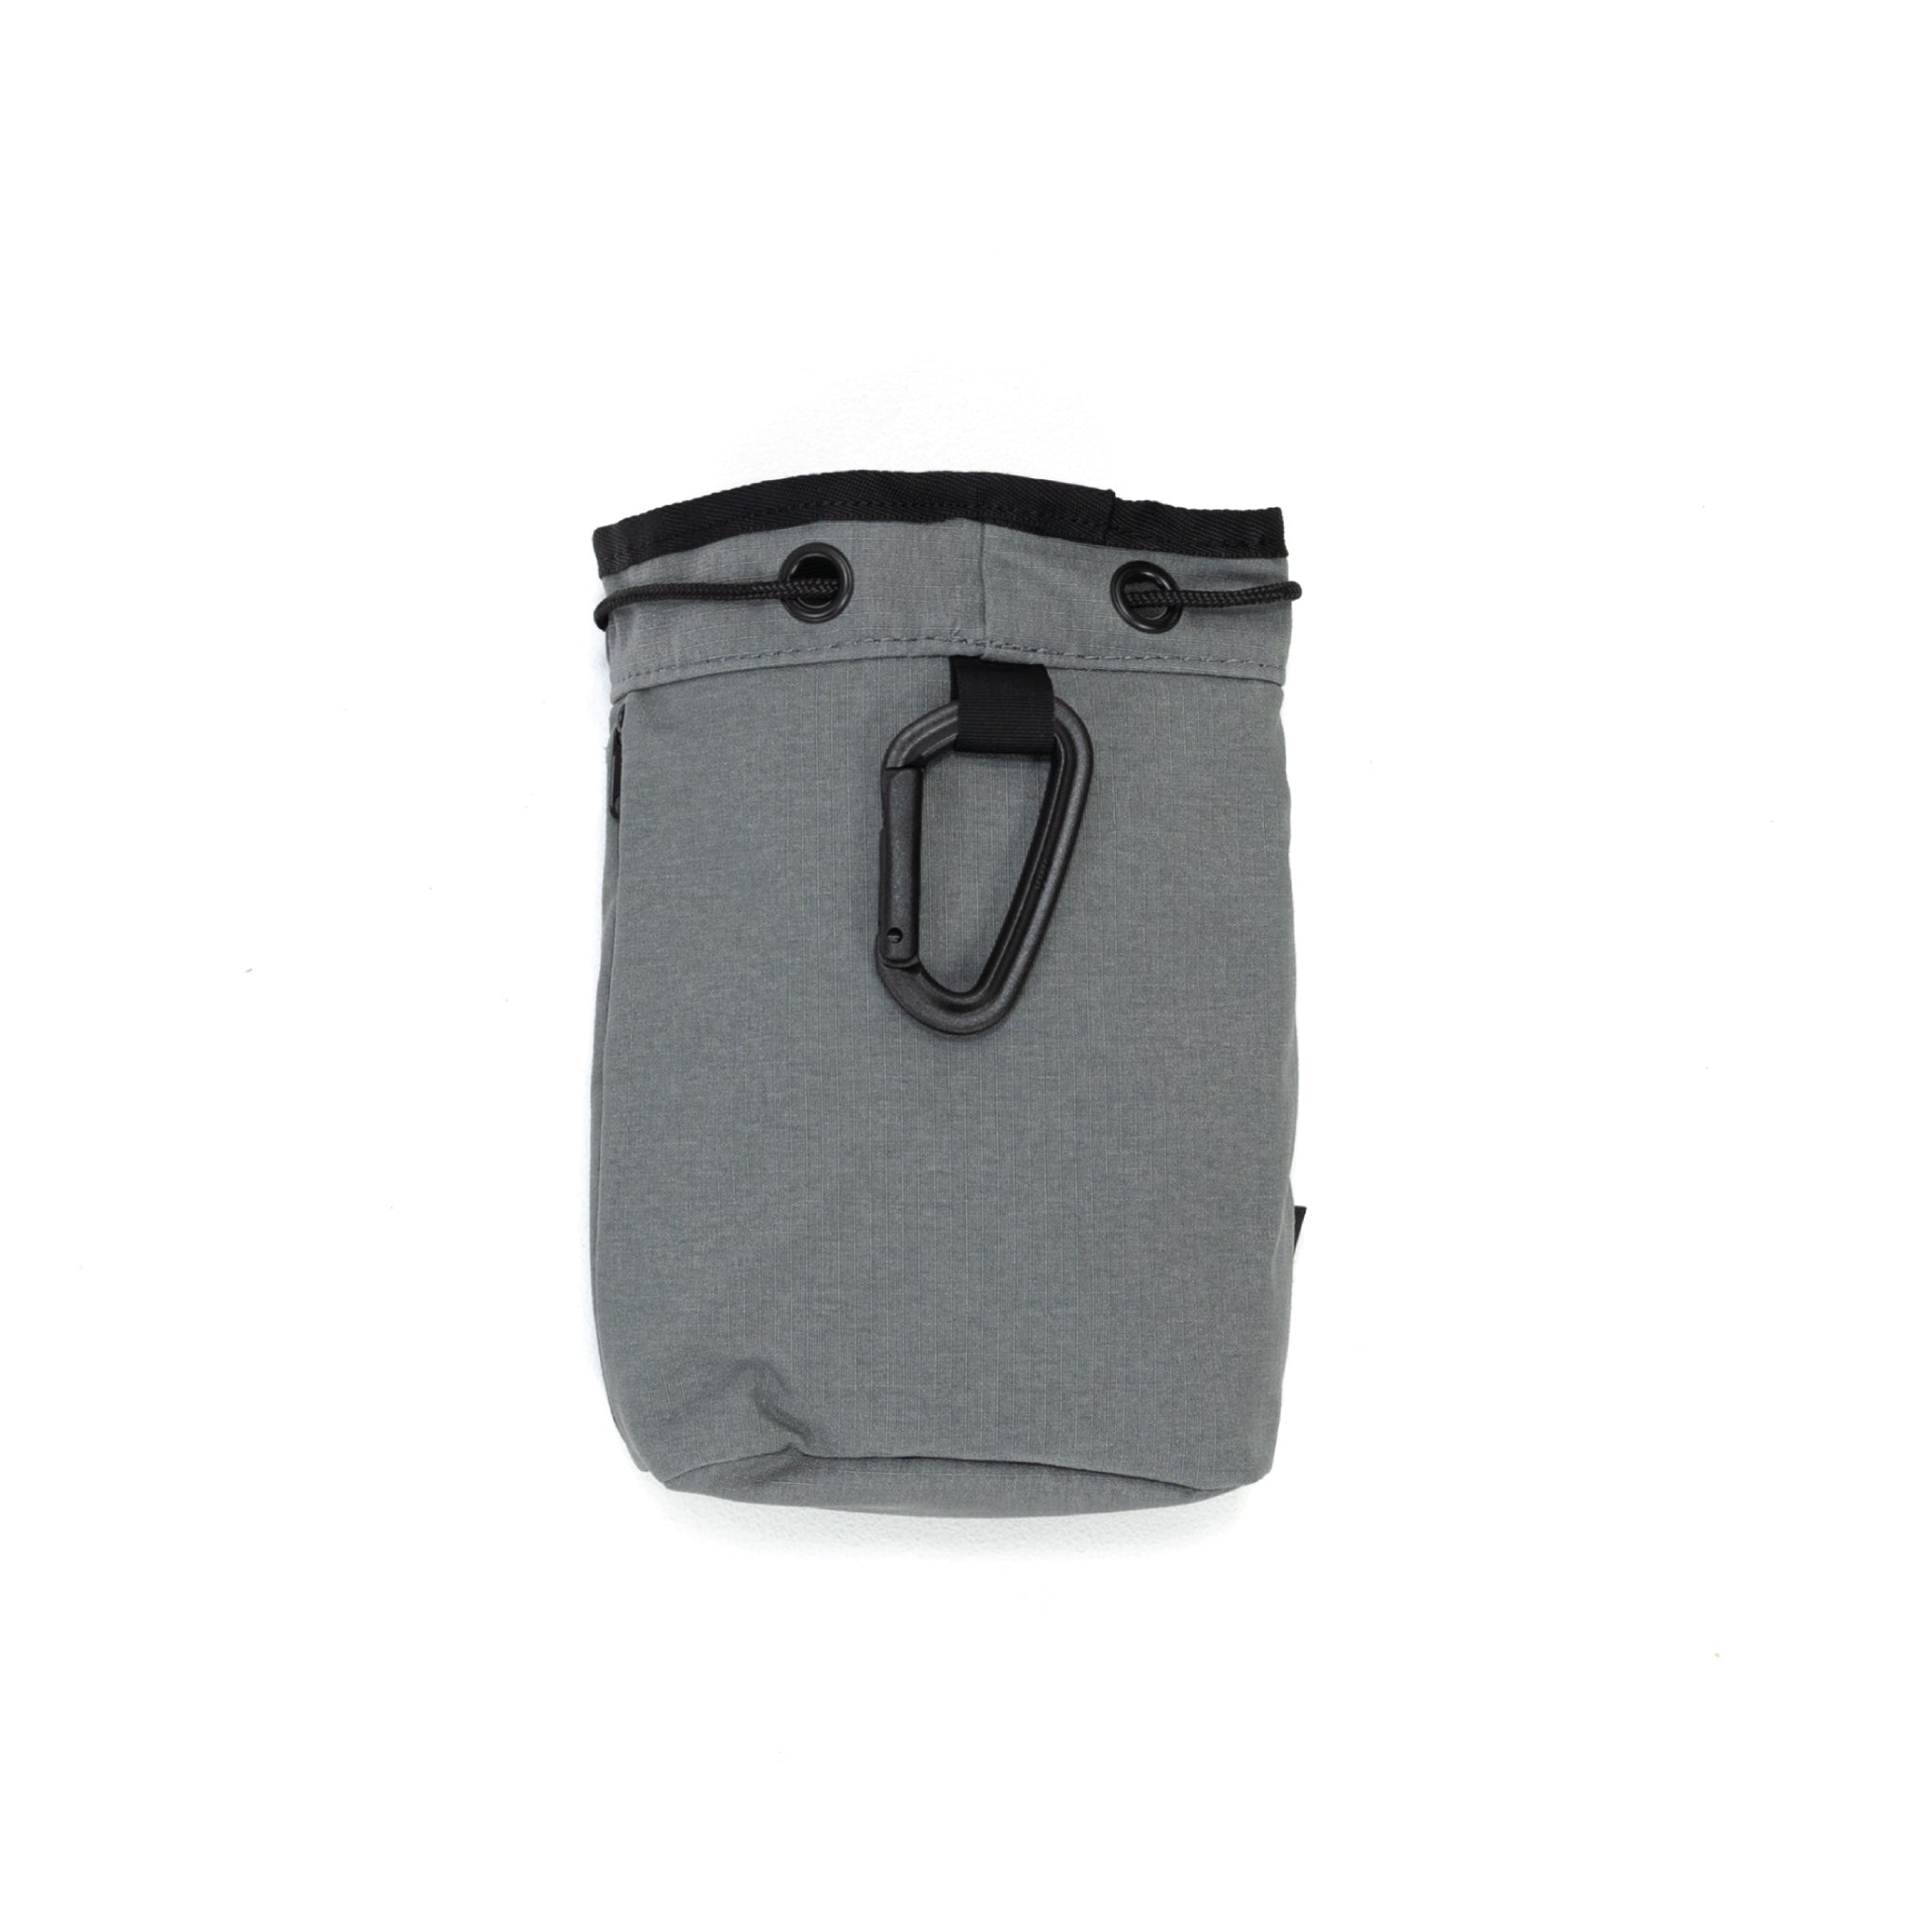 Jones Sports Co. Rangefinder Pouch - Charcoal